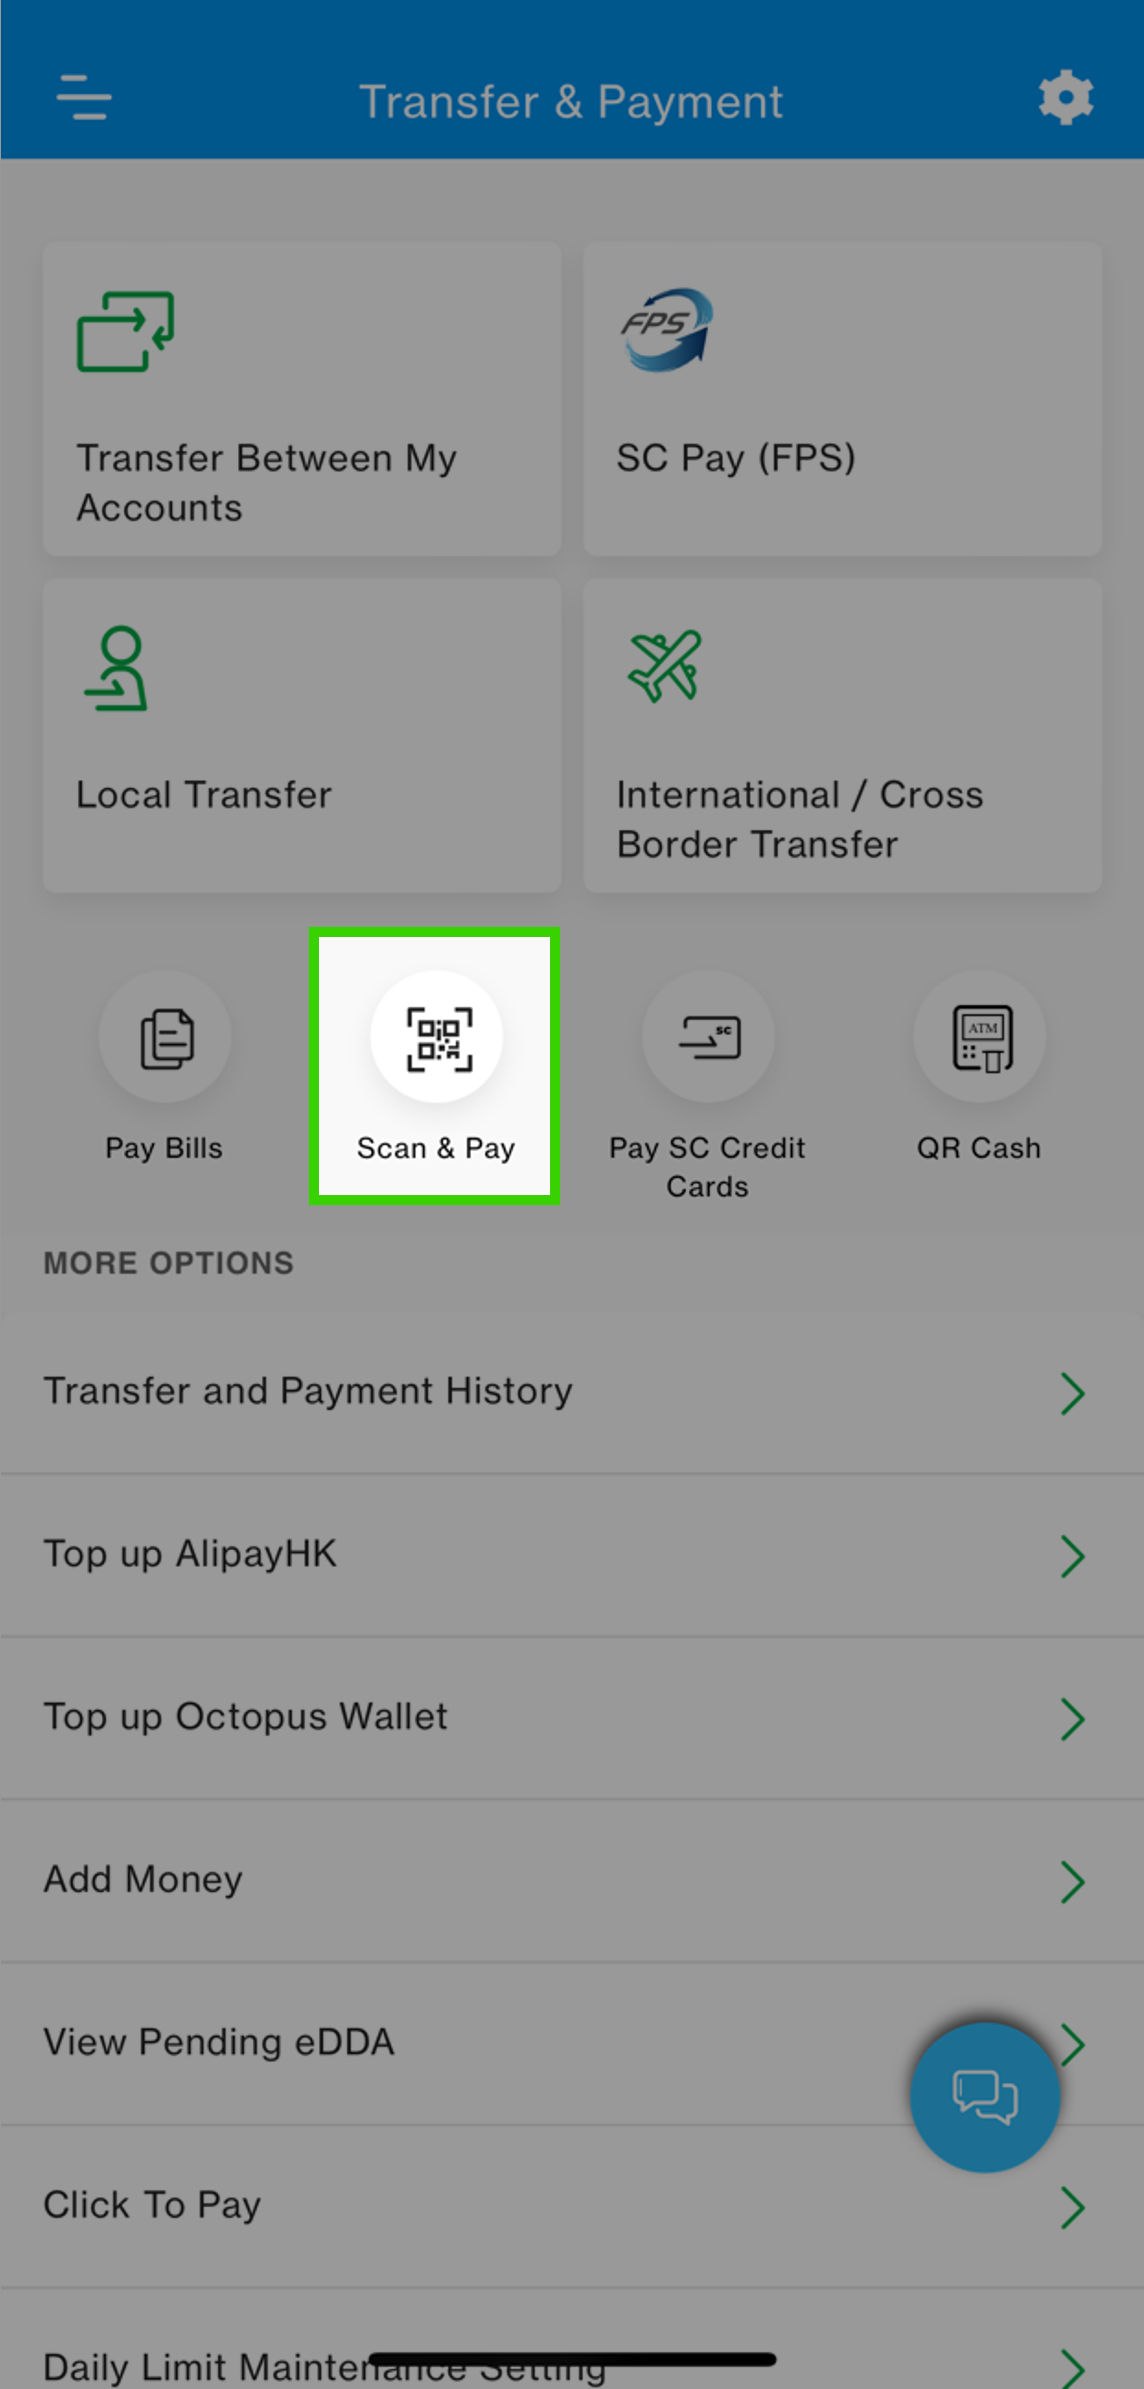 Select ‘Scan & Pay’ in ‘Transfer & Payment’